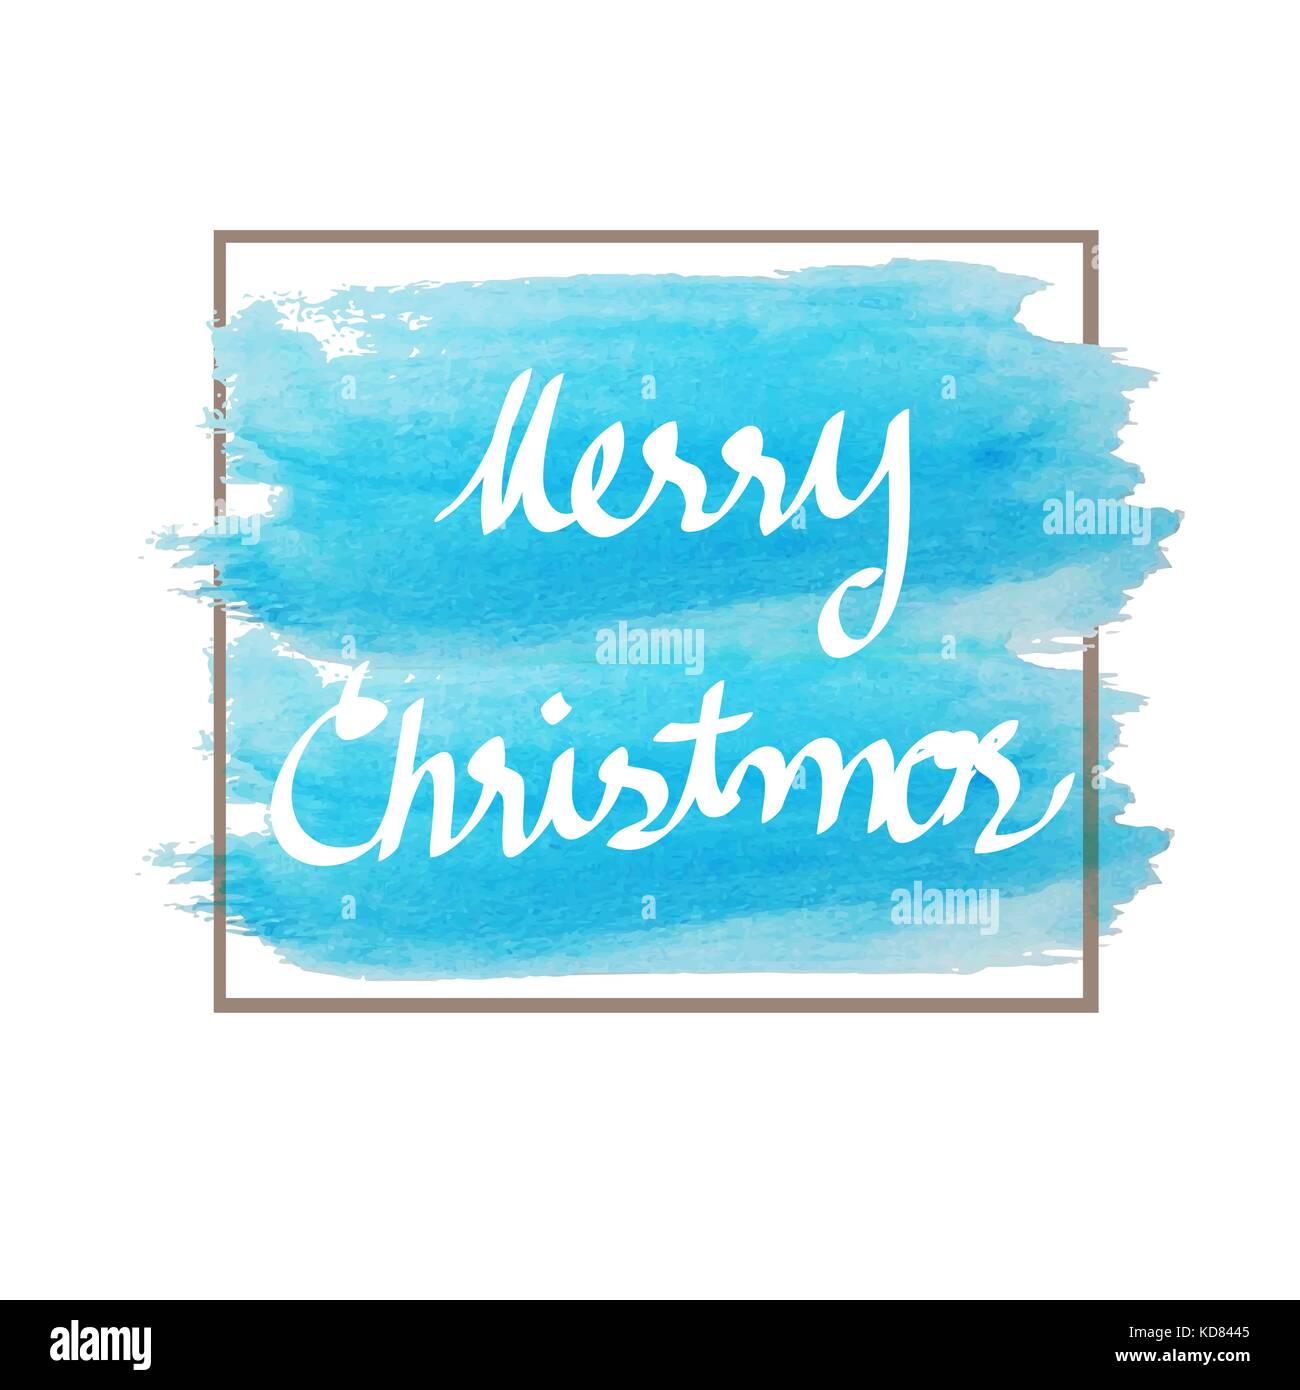 merry christmas in blue color grunge artistic brush strokes in frame Stock Photo